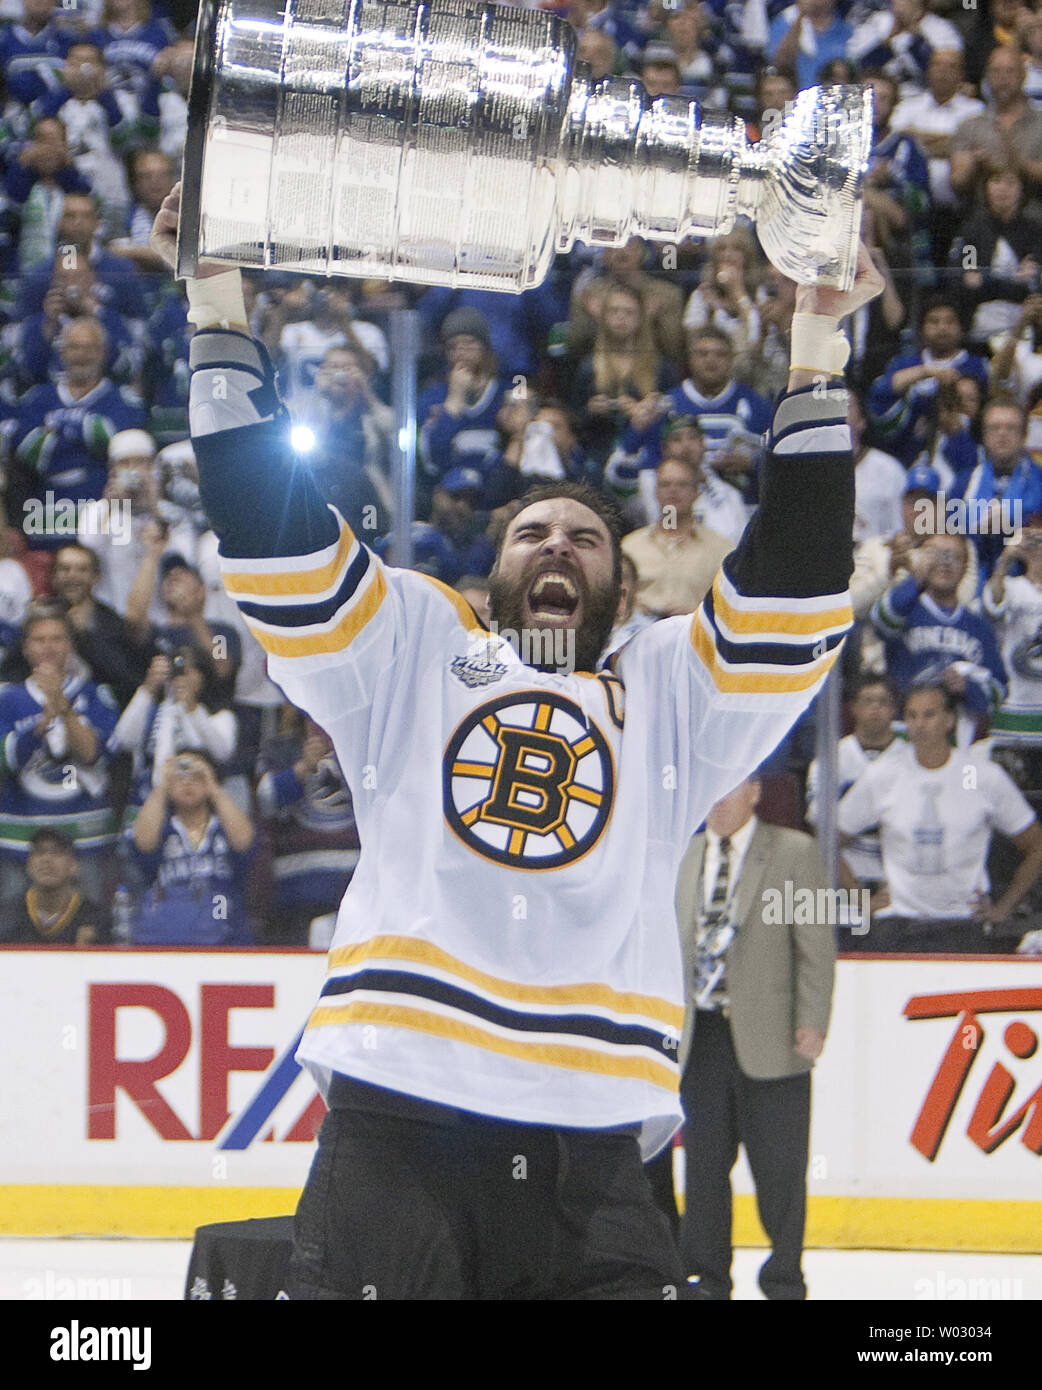 Boston Bruins captain, Zdeno Chara, hoists the Stanley Cup for the